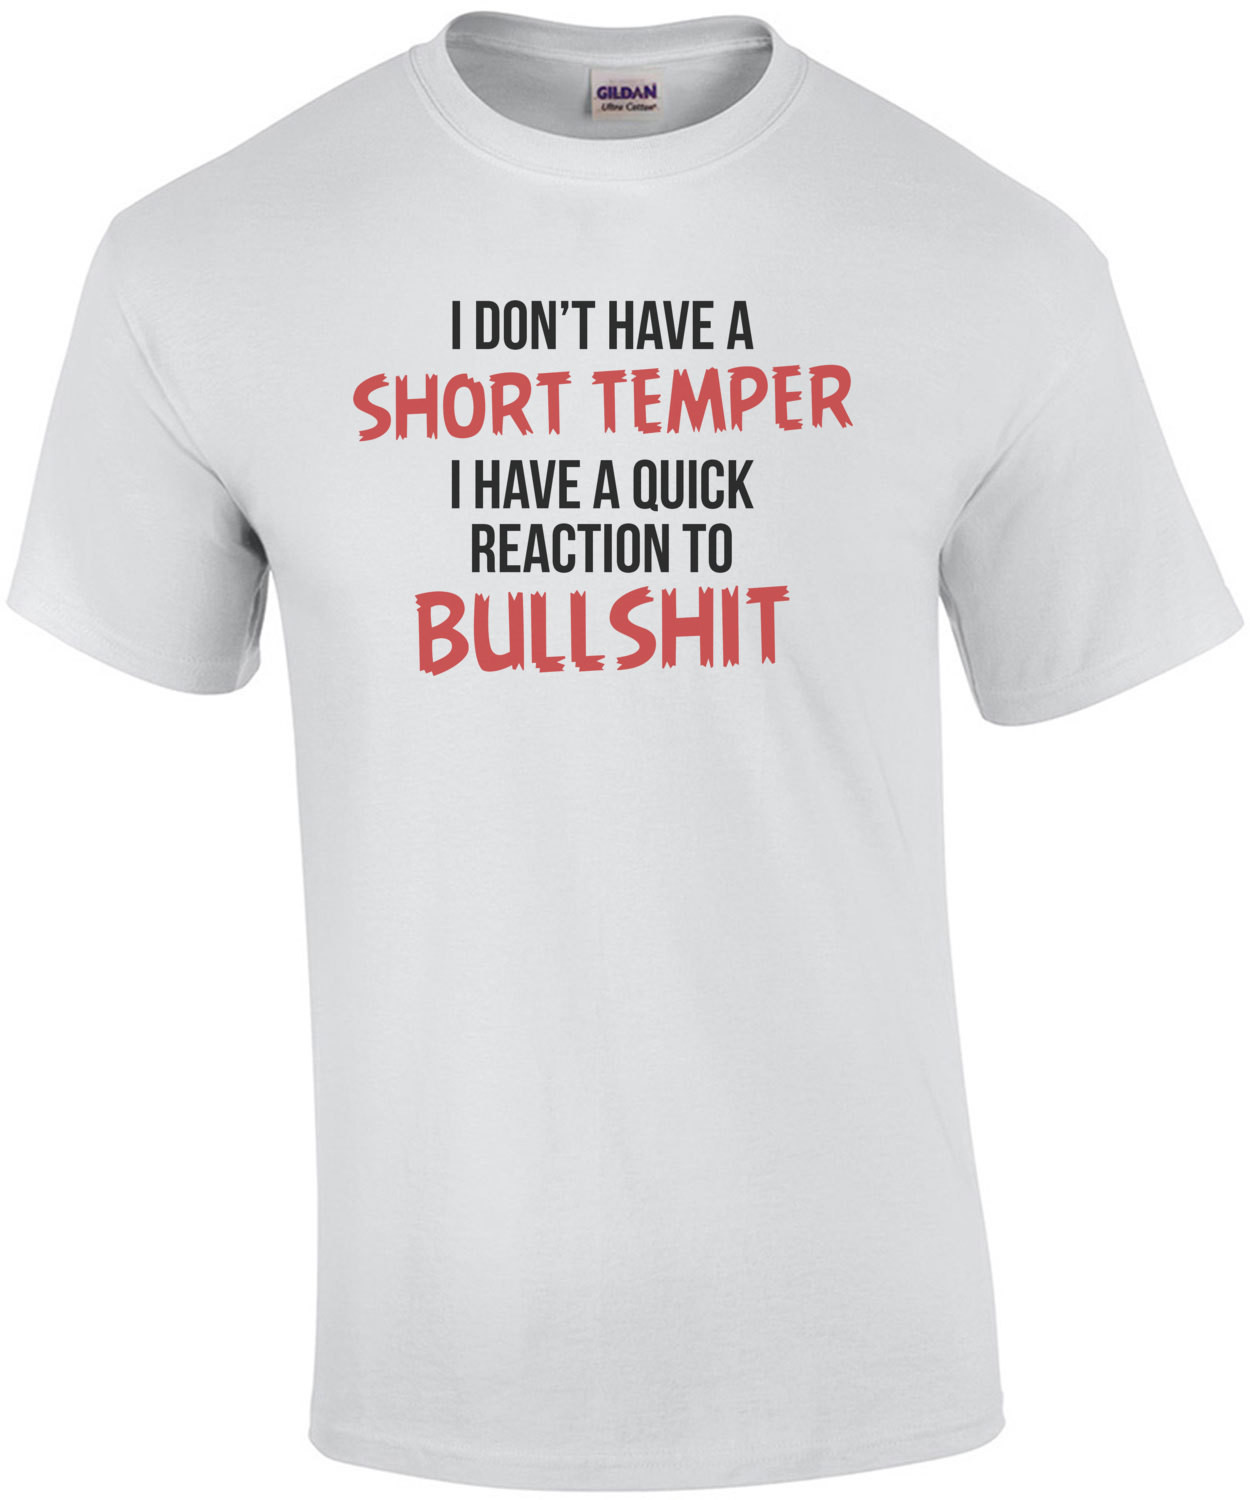 I Don't Have a Short Temper, I Have a Quick Reaction To Bullshit T-shirt